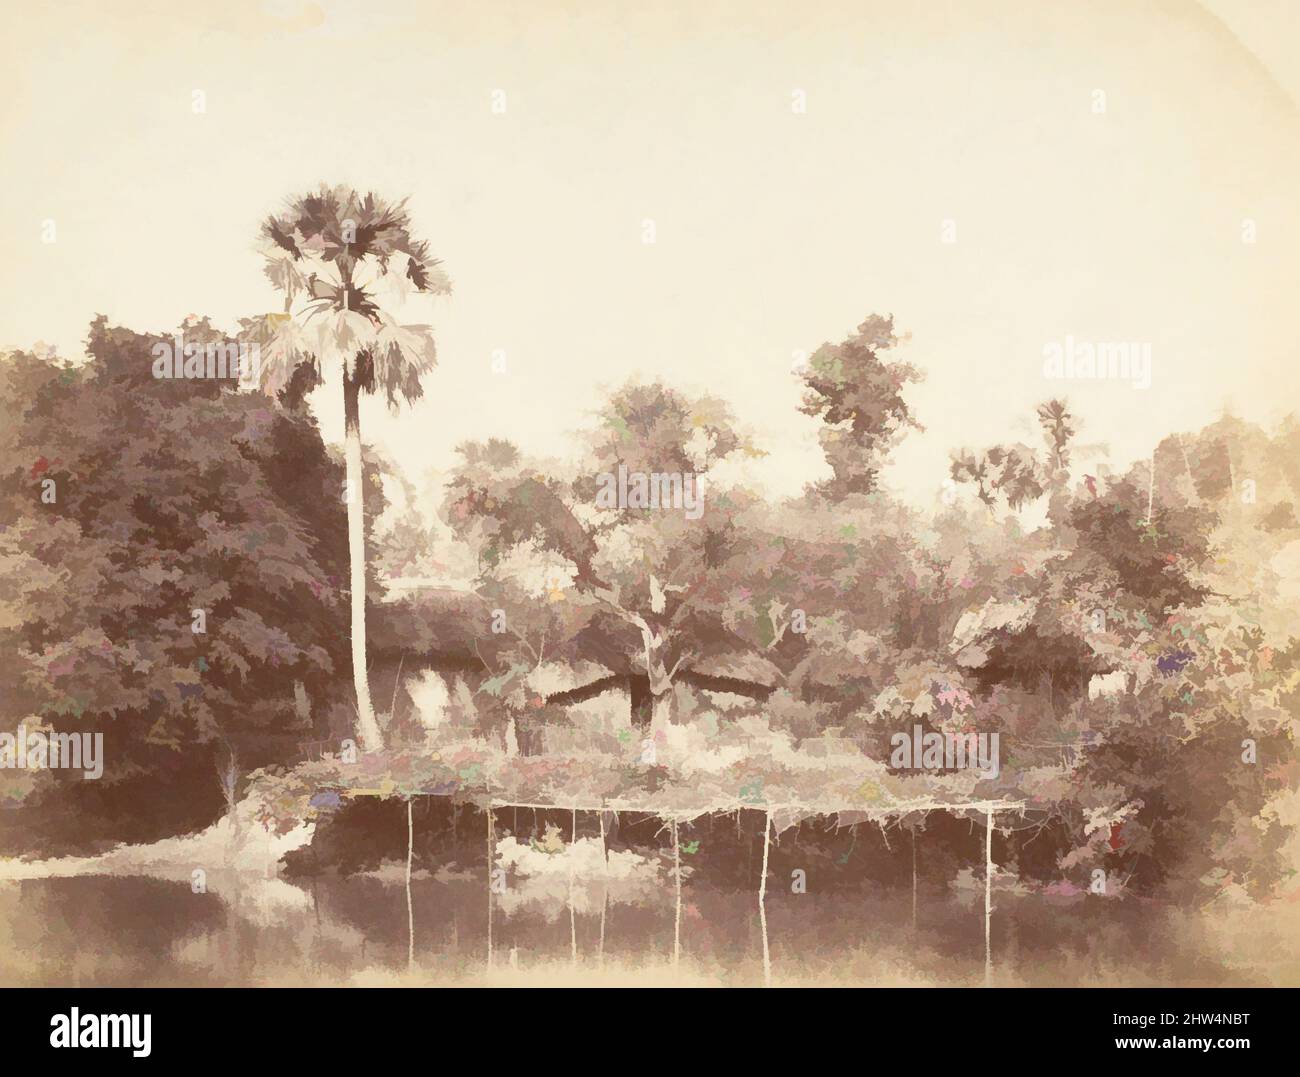 Art inspired by View of the Jungle, Bengal, 1850s, Albumen silver print, Image: 19.1 x 25 cm (7 1/2 x 9 13/16 in.), Photographs, Captain R. B. Hill, Classic works modernized by Artotop with a splash of modernity. Shapes, color and value, eye-catching visual impact on art. Emotions through freedom of artworks in a contemporary way. A timeless message pursuing a wildly creative new direction. Artists turning to the digital medium and creating the Artotop NFT Stock Photo